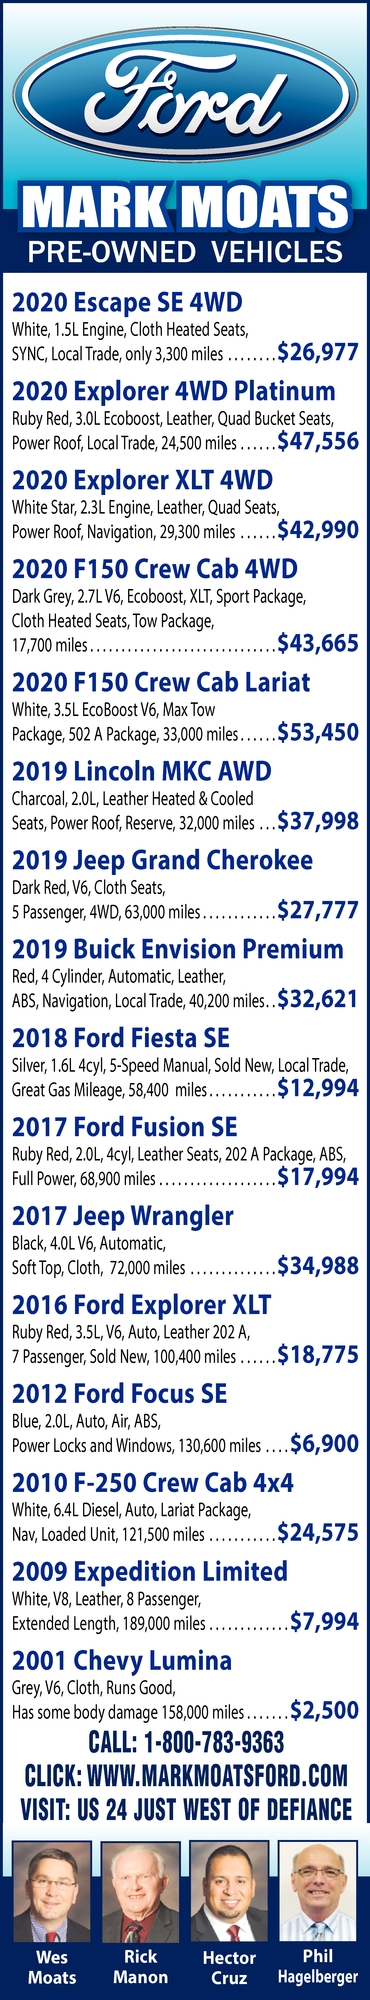 Pre-Owned Vehicles